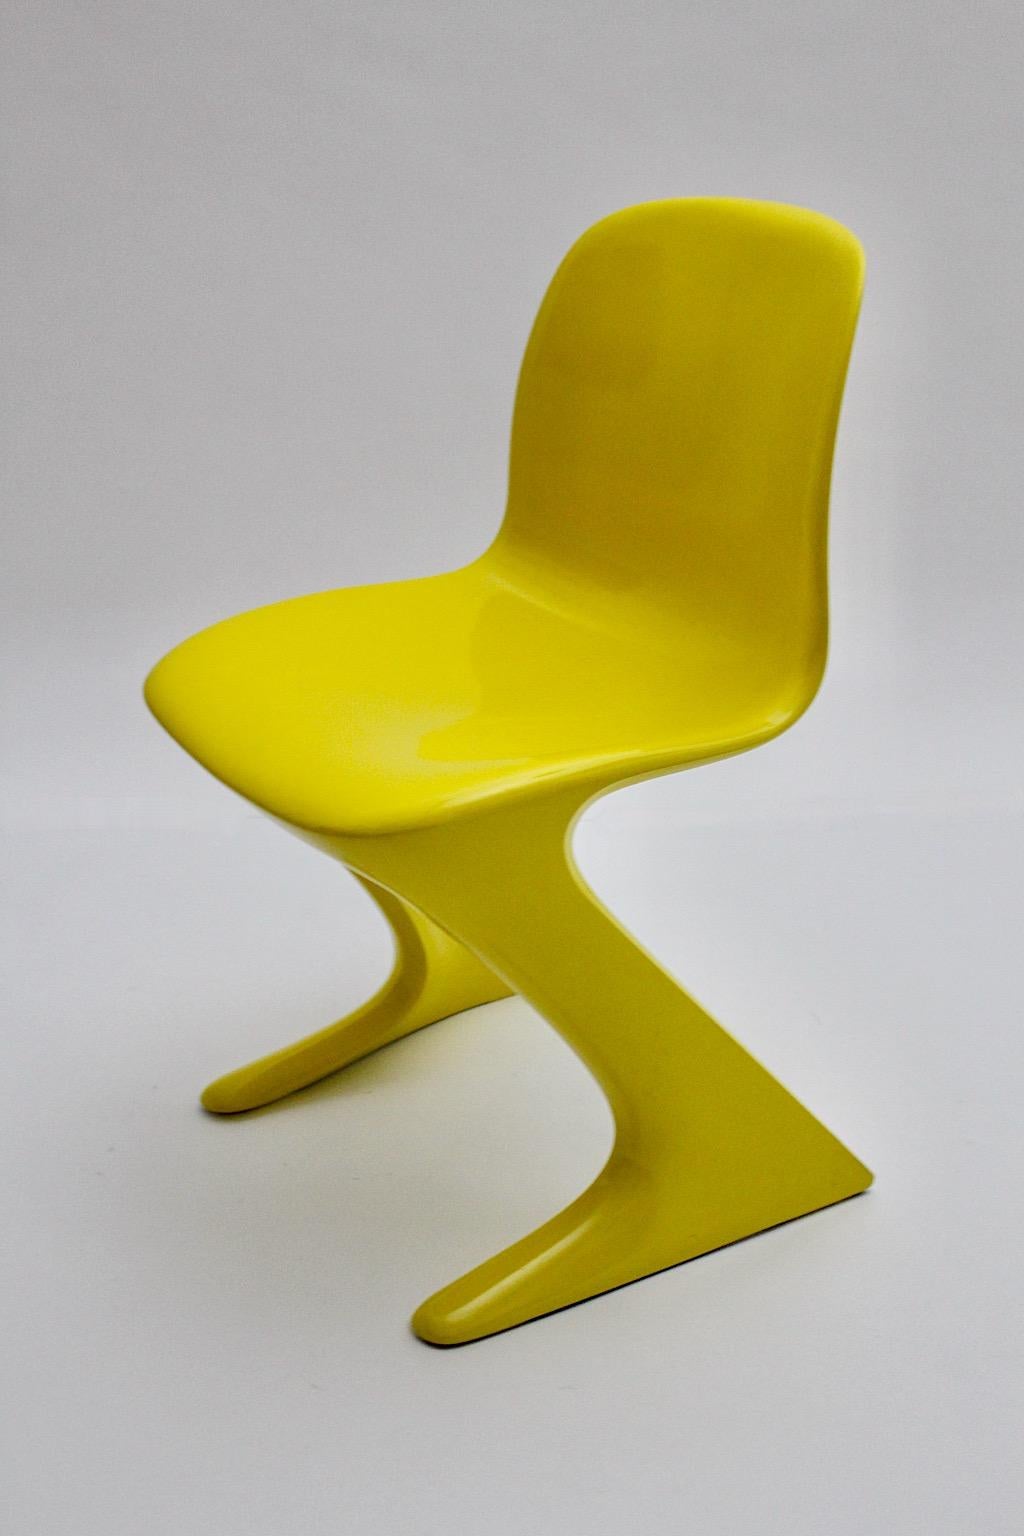 Space Age Vintage Yellow Plastic Chair Kangaroo Chair Ernst Moeckl 1960s Germany For Sale 3